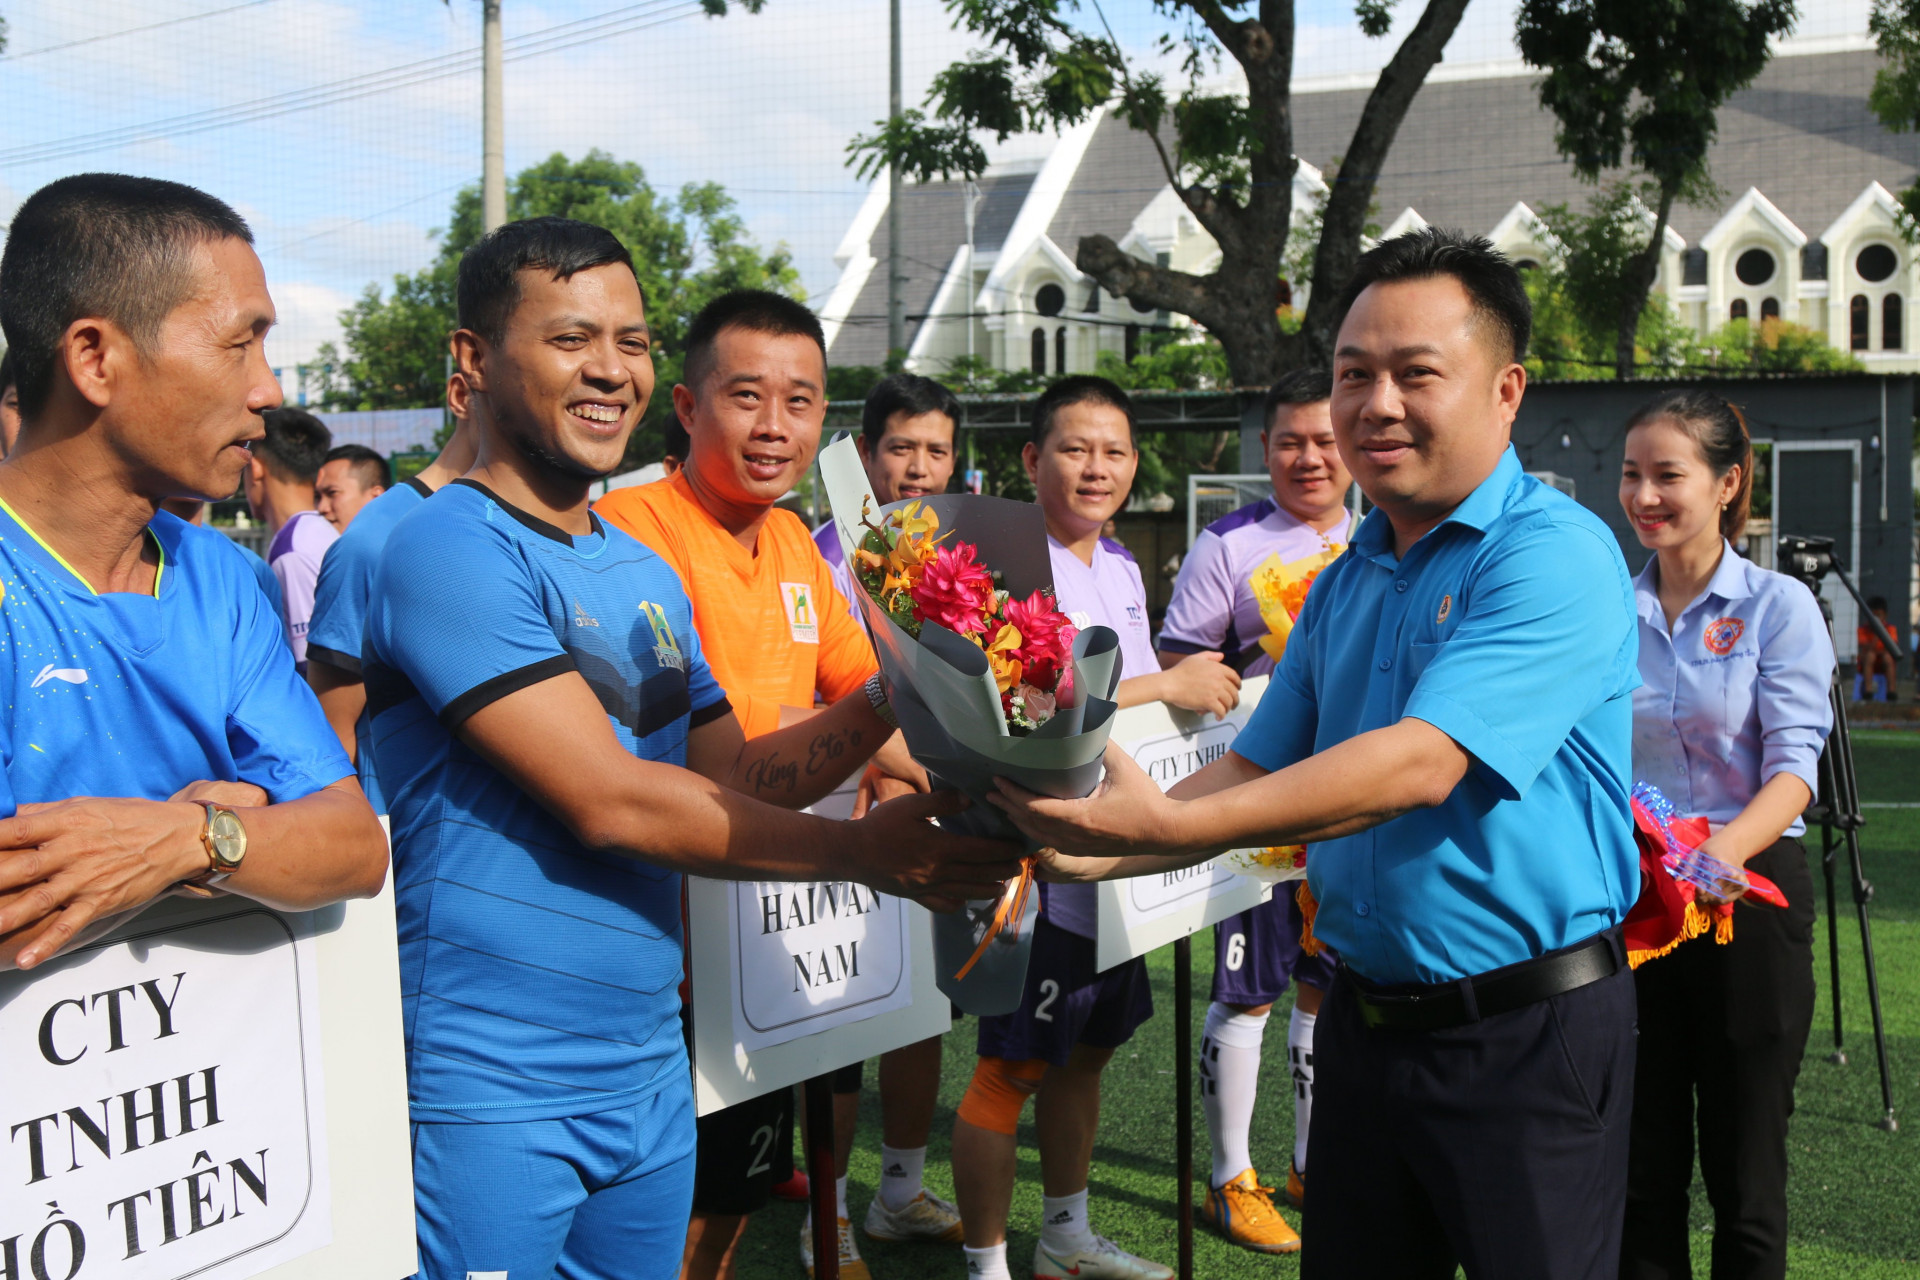 Leader of Khanh Hoa’s Labor Federation offering flowers to teams